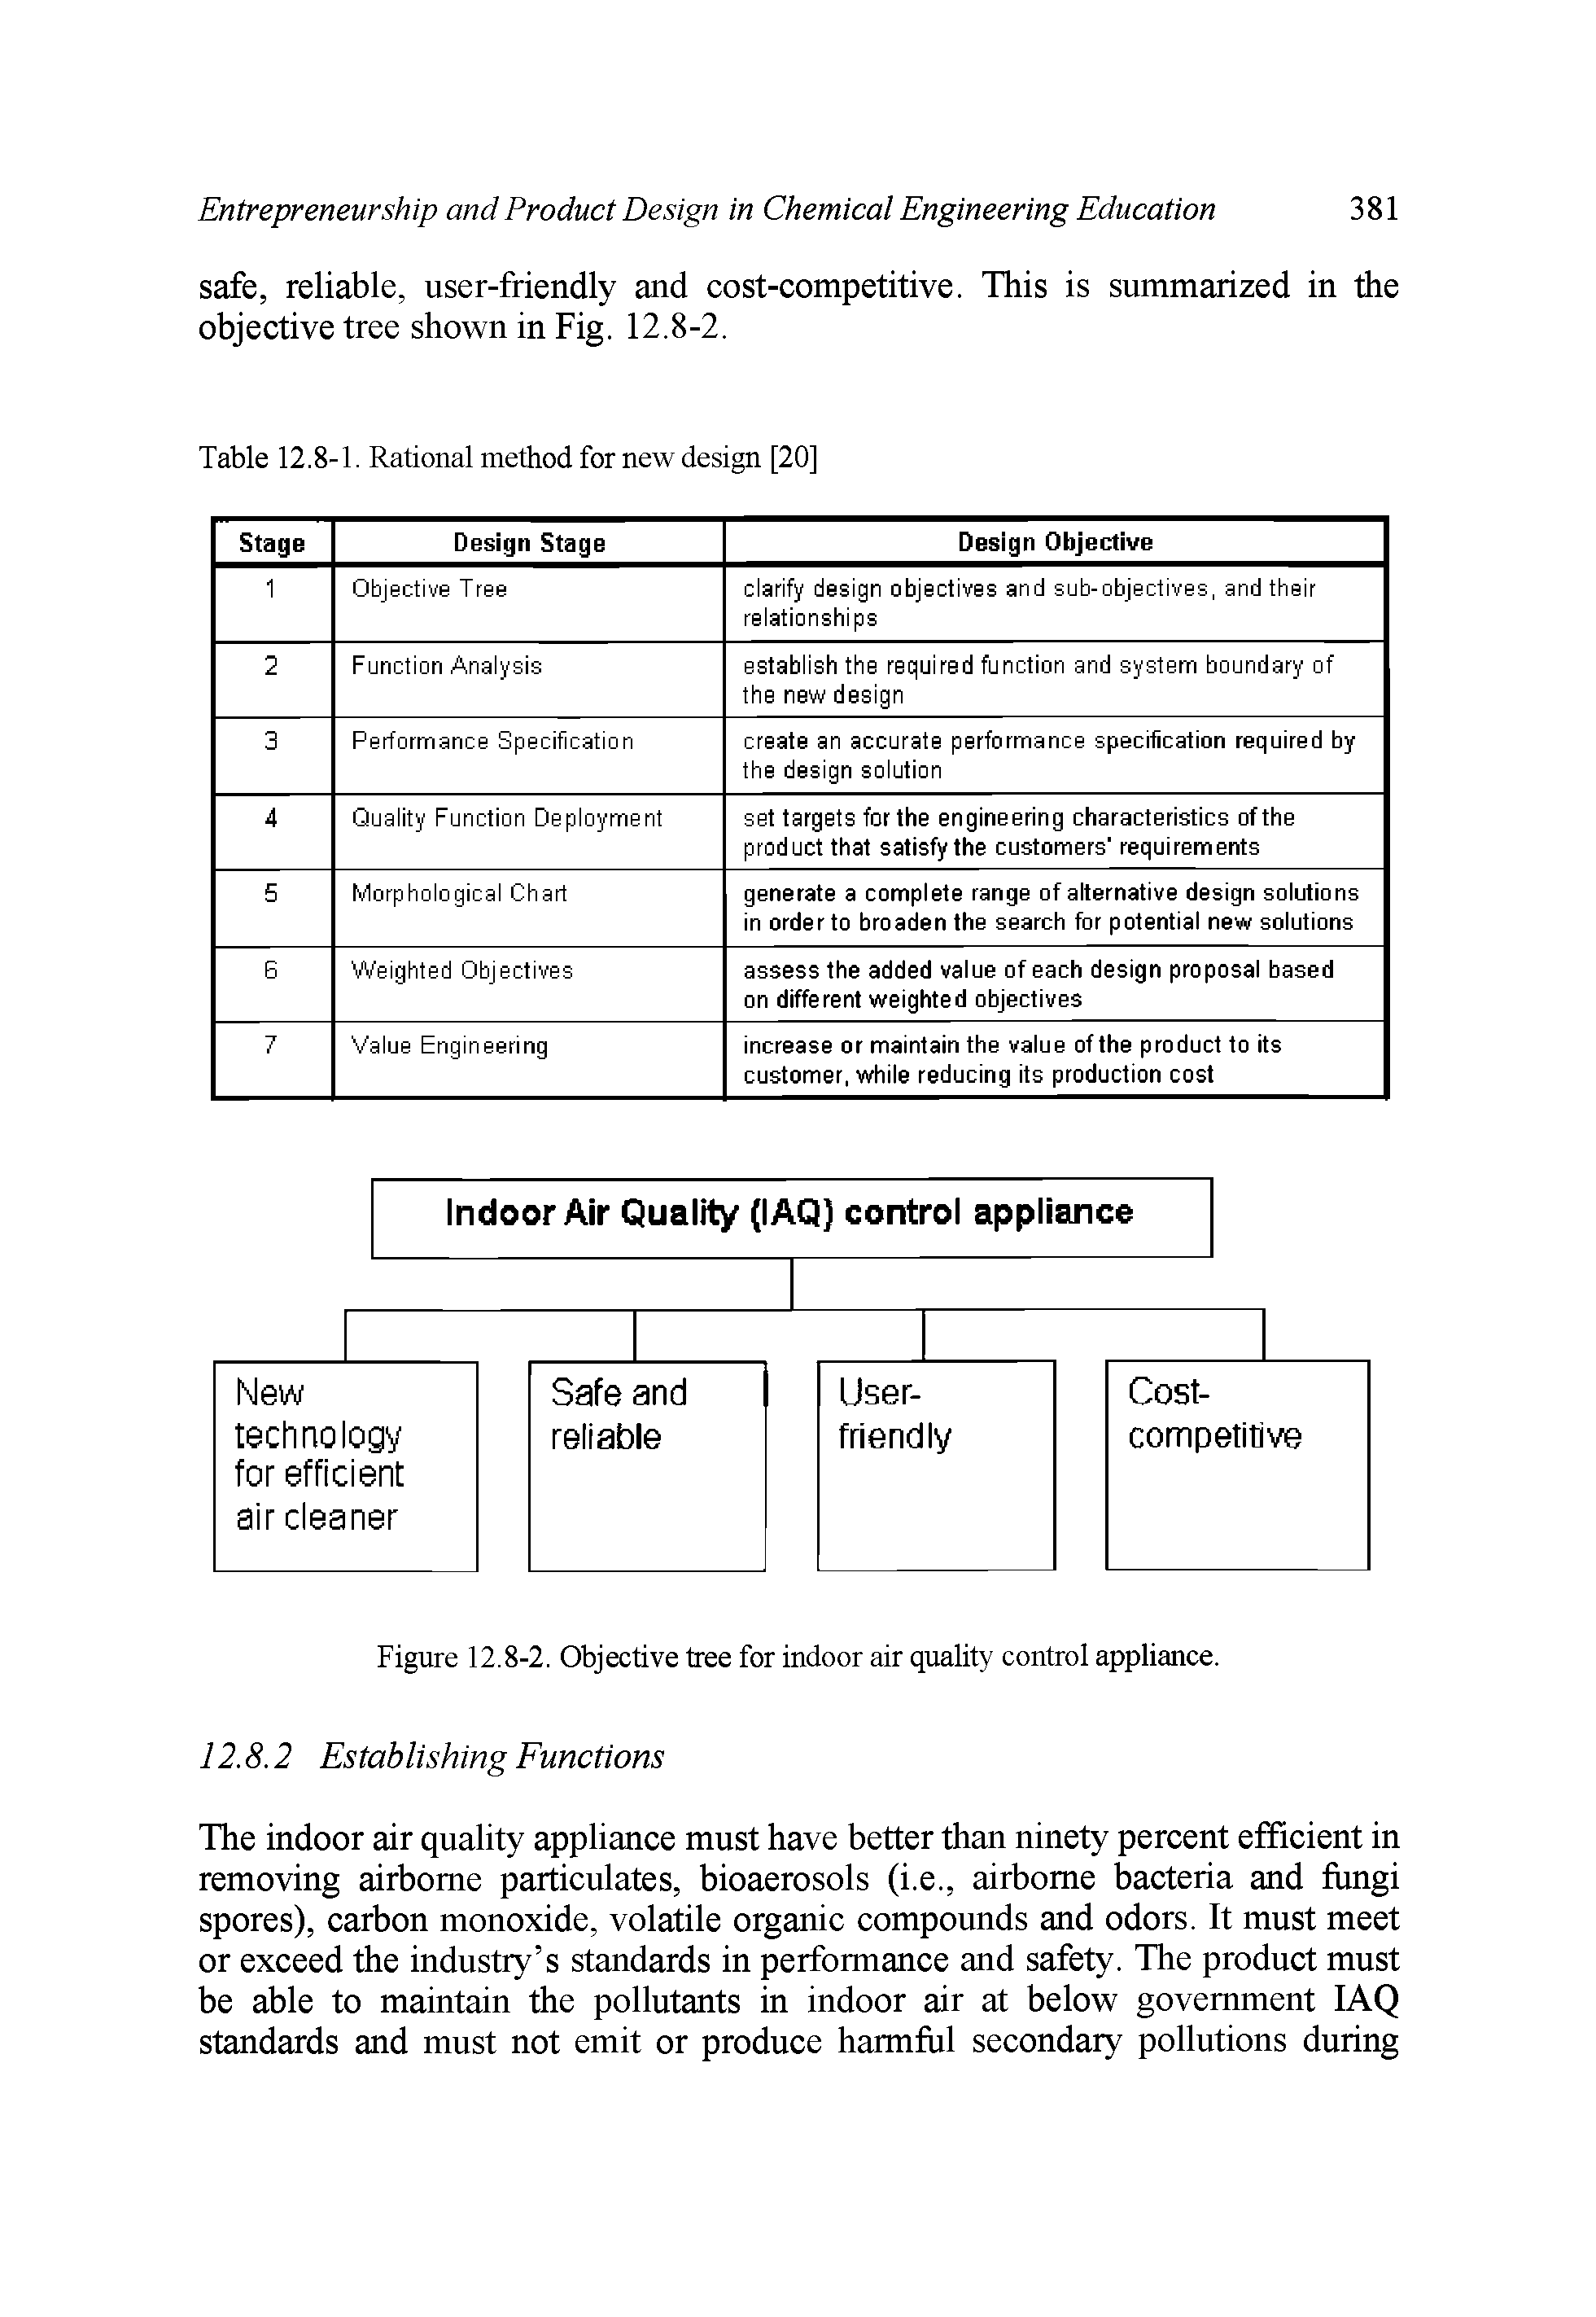 Figure 12.8-2. Objective tree for indoor air quality control appliance.